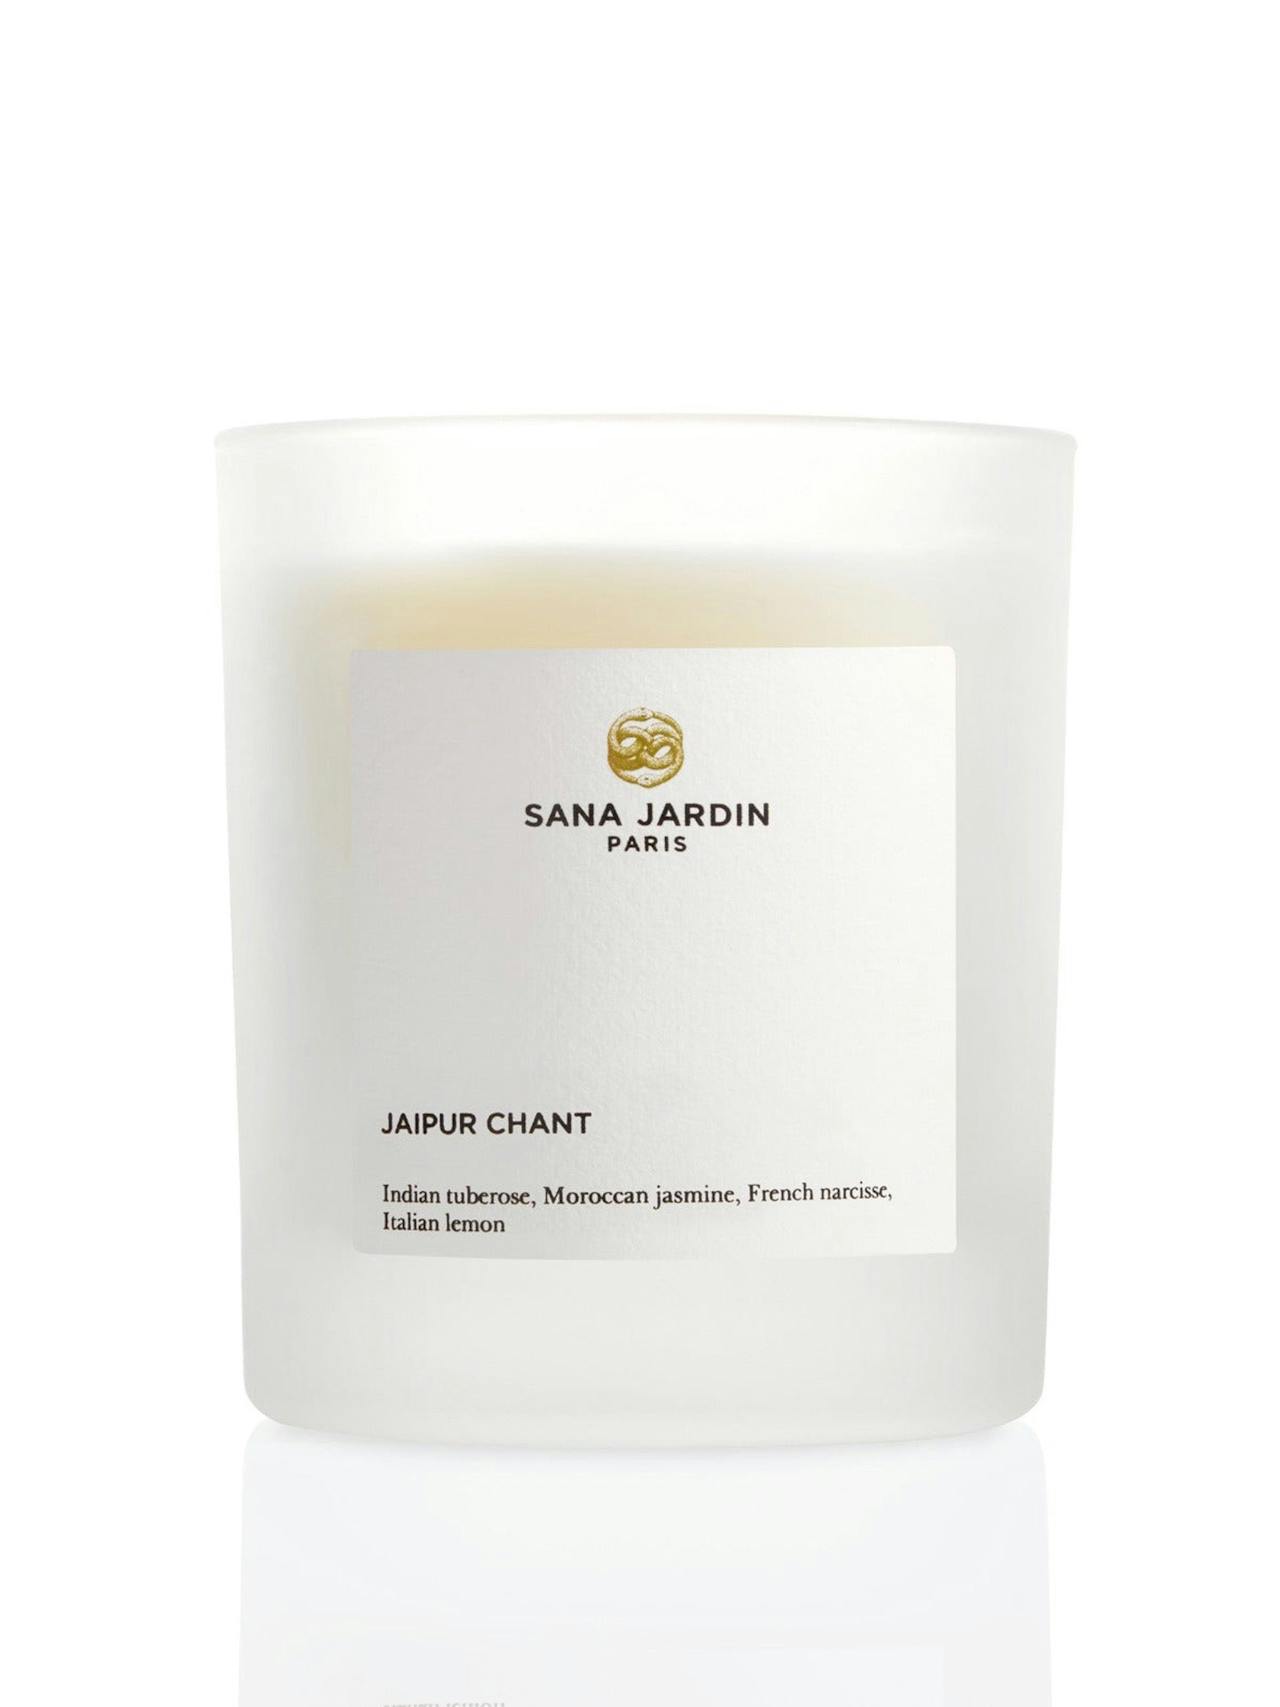 Jaipur Chant scented candle